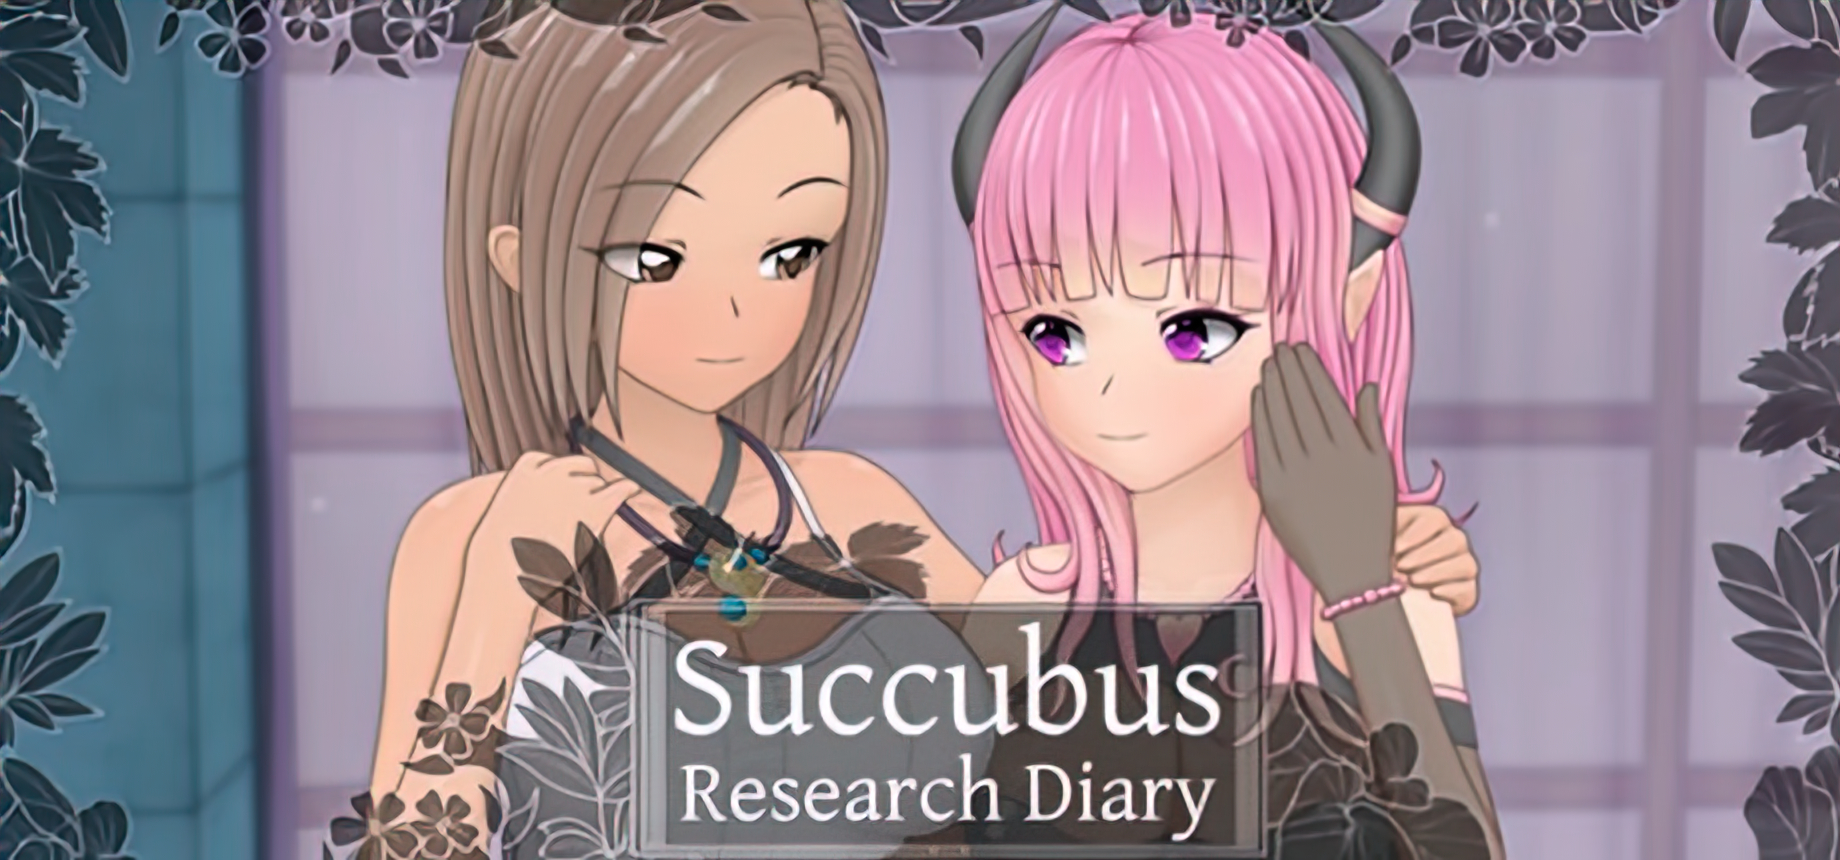 Succubus Research Diary [v1.0.0] main image